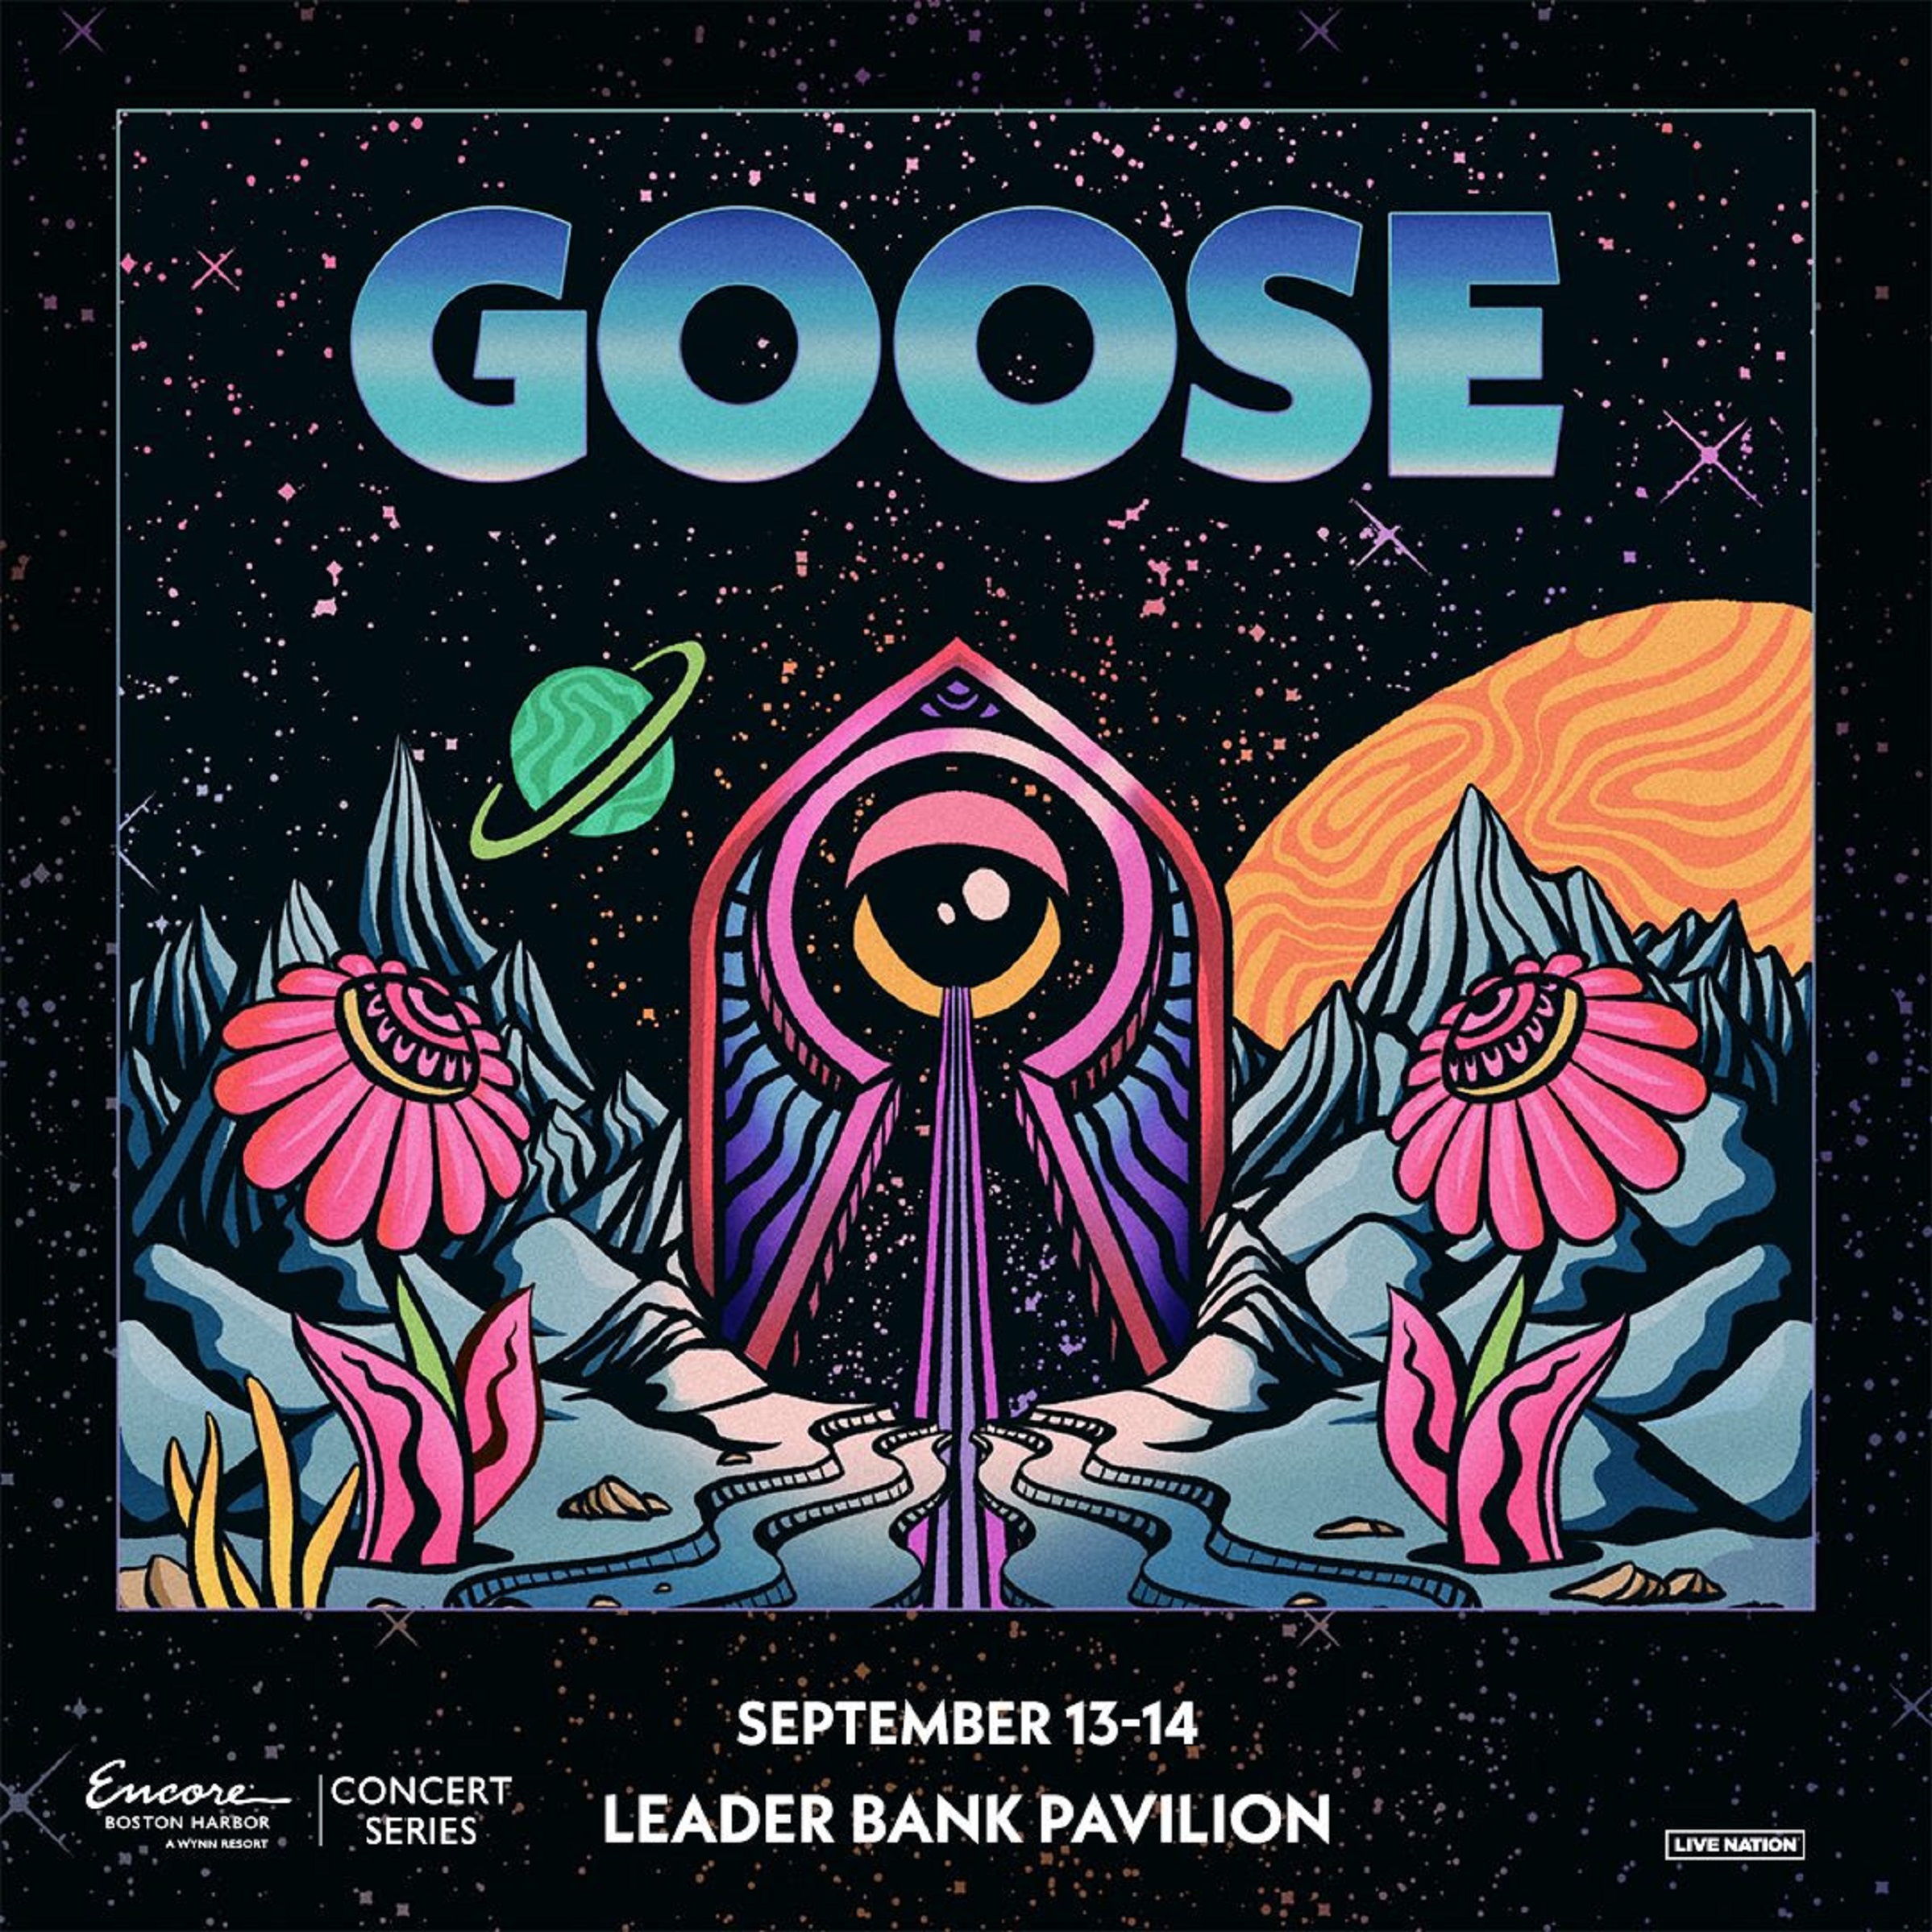 GOOSE TO RETURN TO BOSTON FOR TWO NIGHTS AT LEADER BANK PAVILION